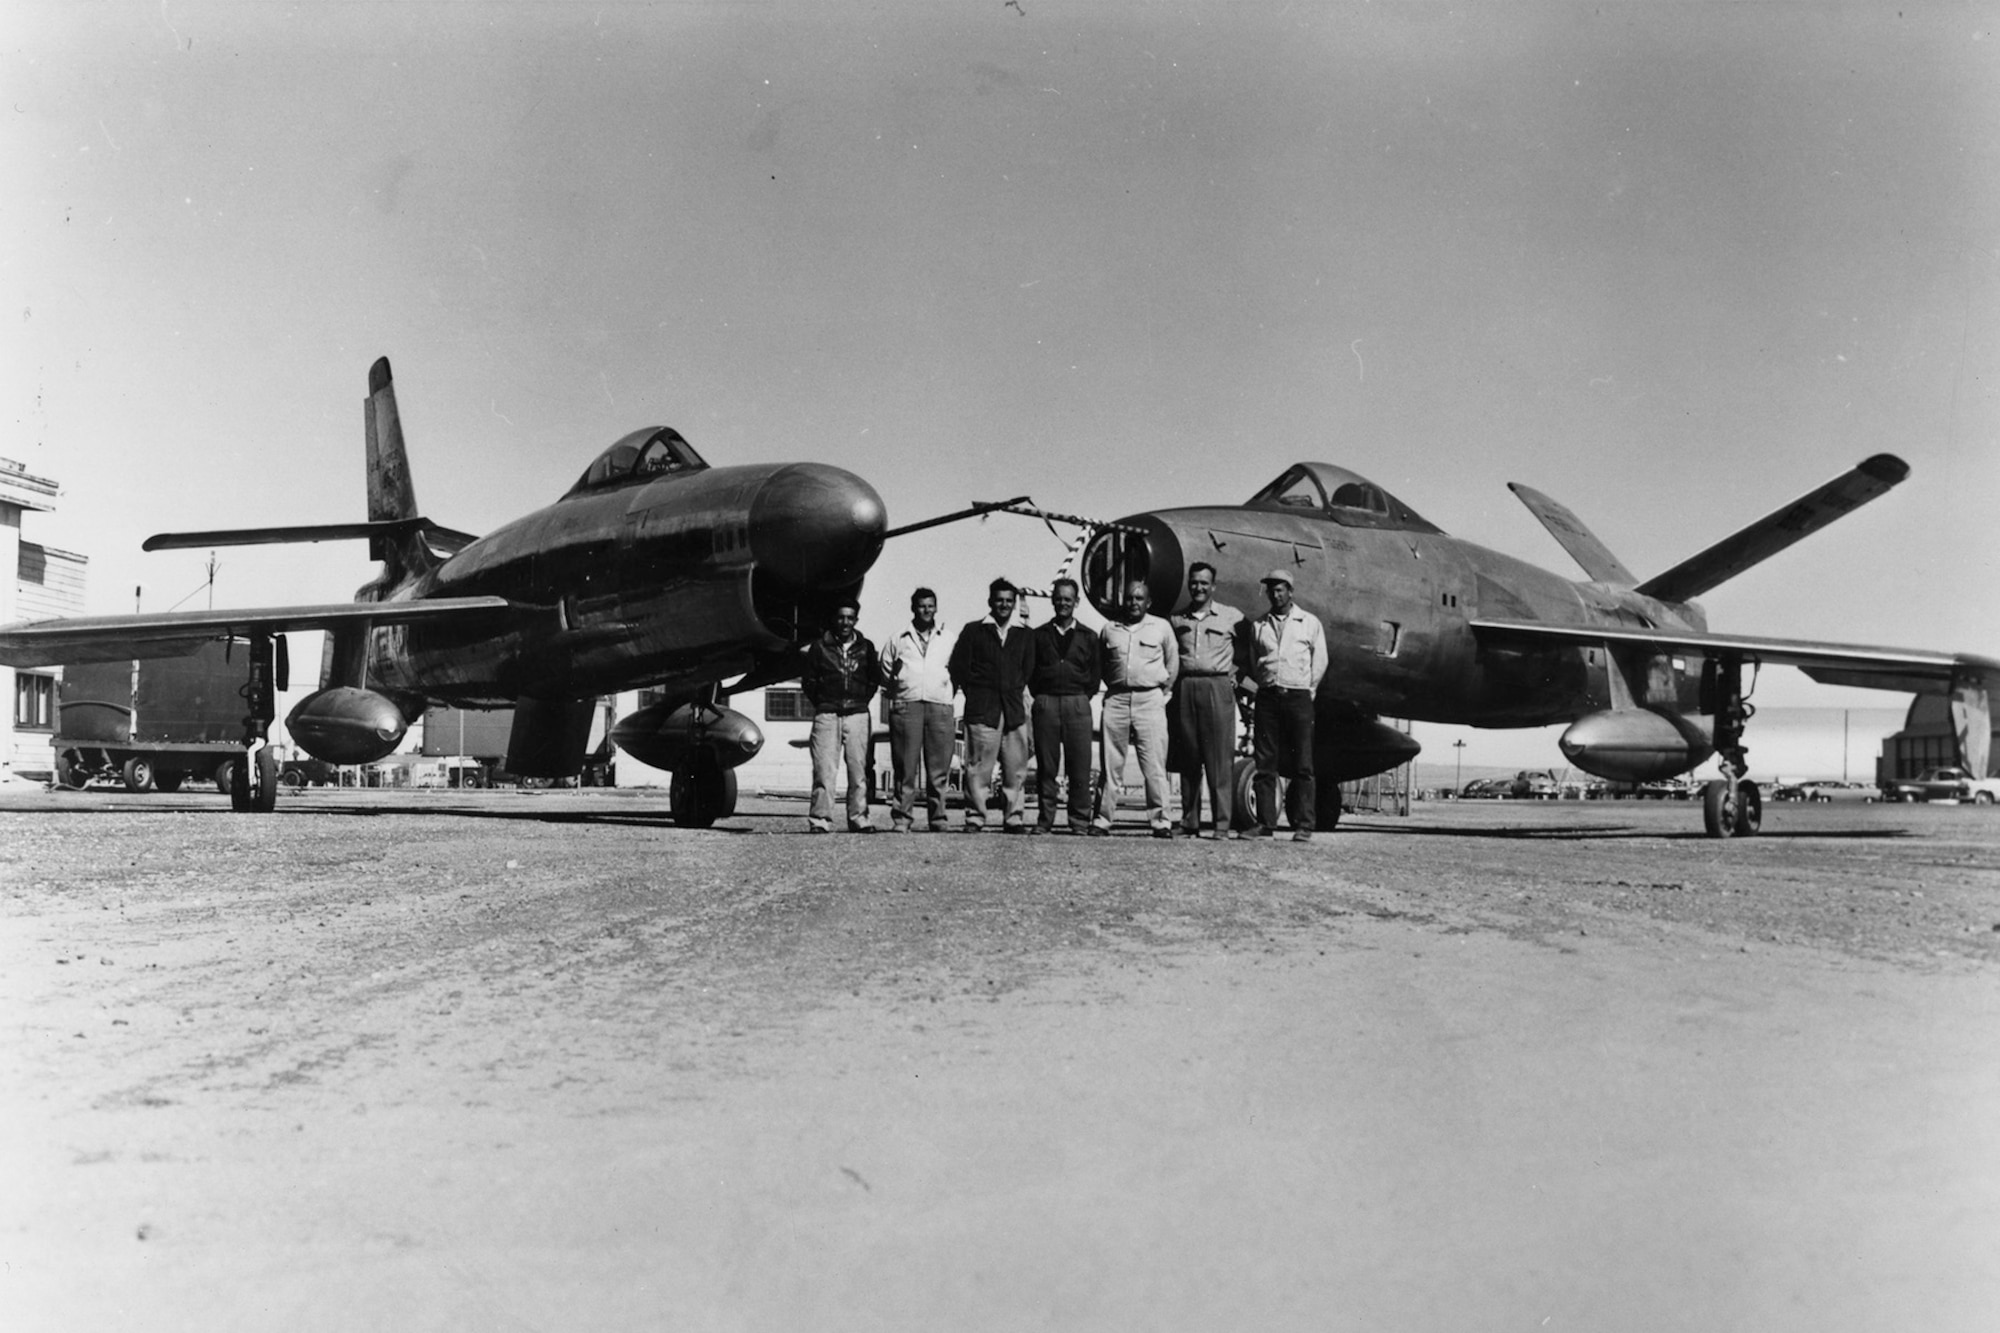 Both XF-91s received modifications during the test program. The museum’s aircraft (left) incorporated a radar nose and revised intake, while the other XF-91 (right) tested a “V-tail.” (U.S. Air Force photo)